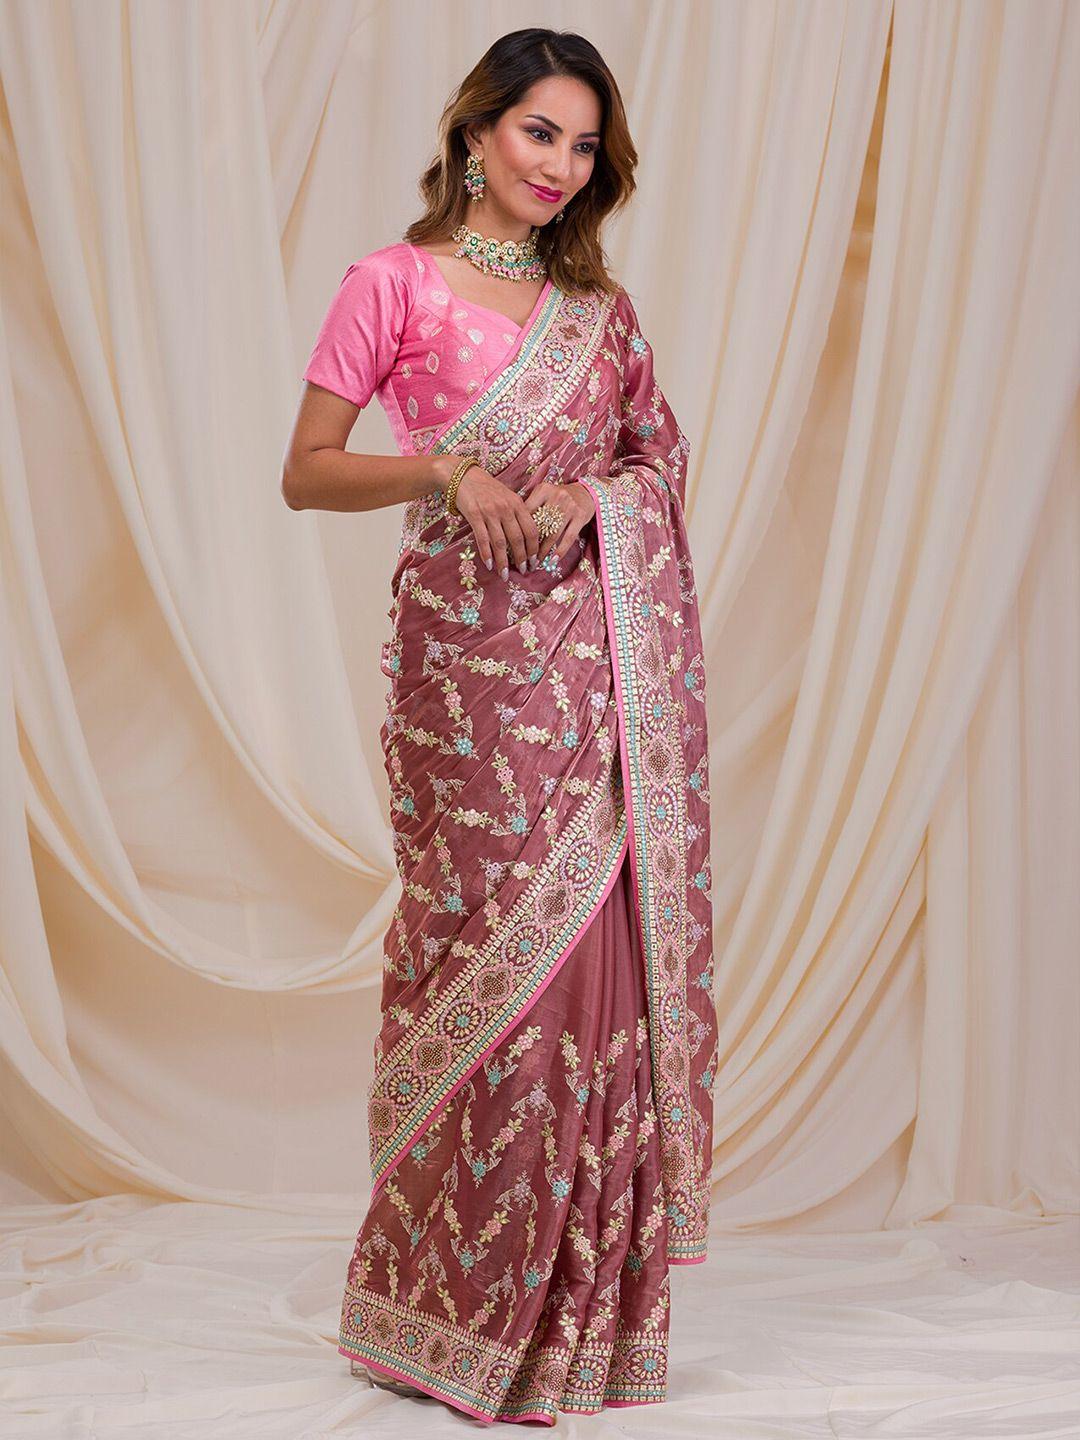 koskii--floral-embroidered-beads-and-stones-poly-chiffon-saree